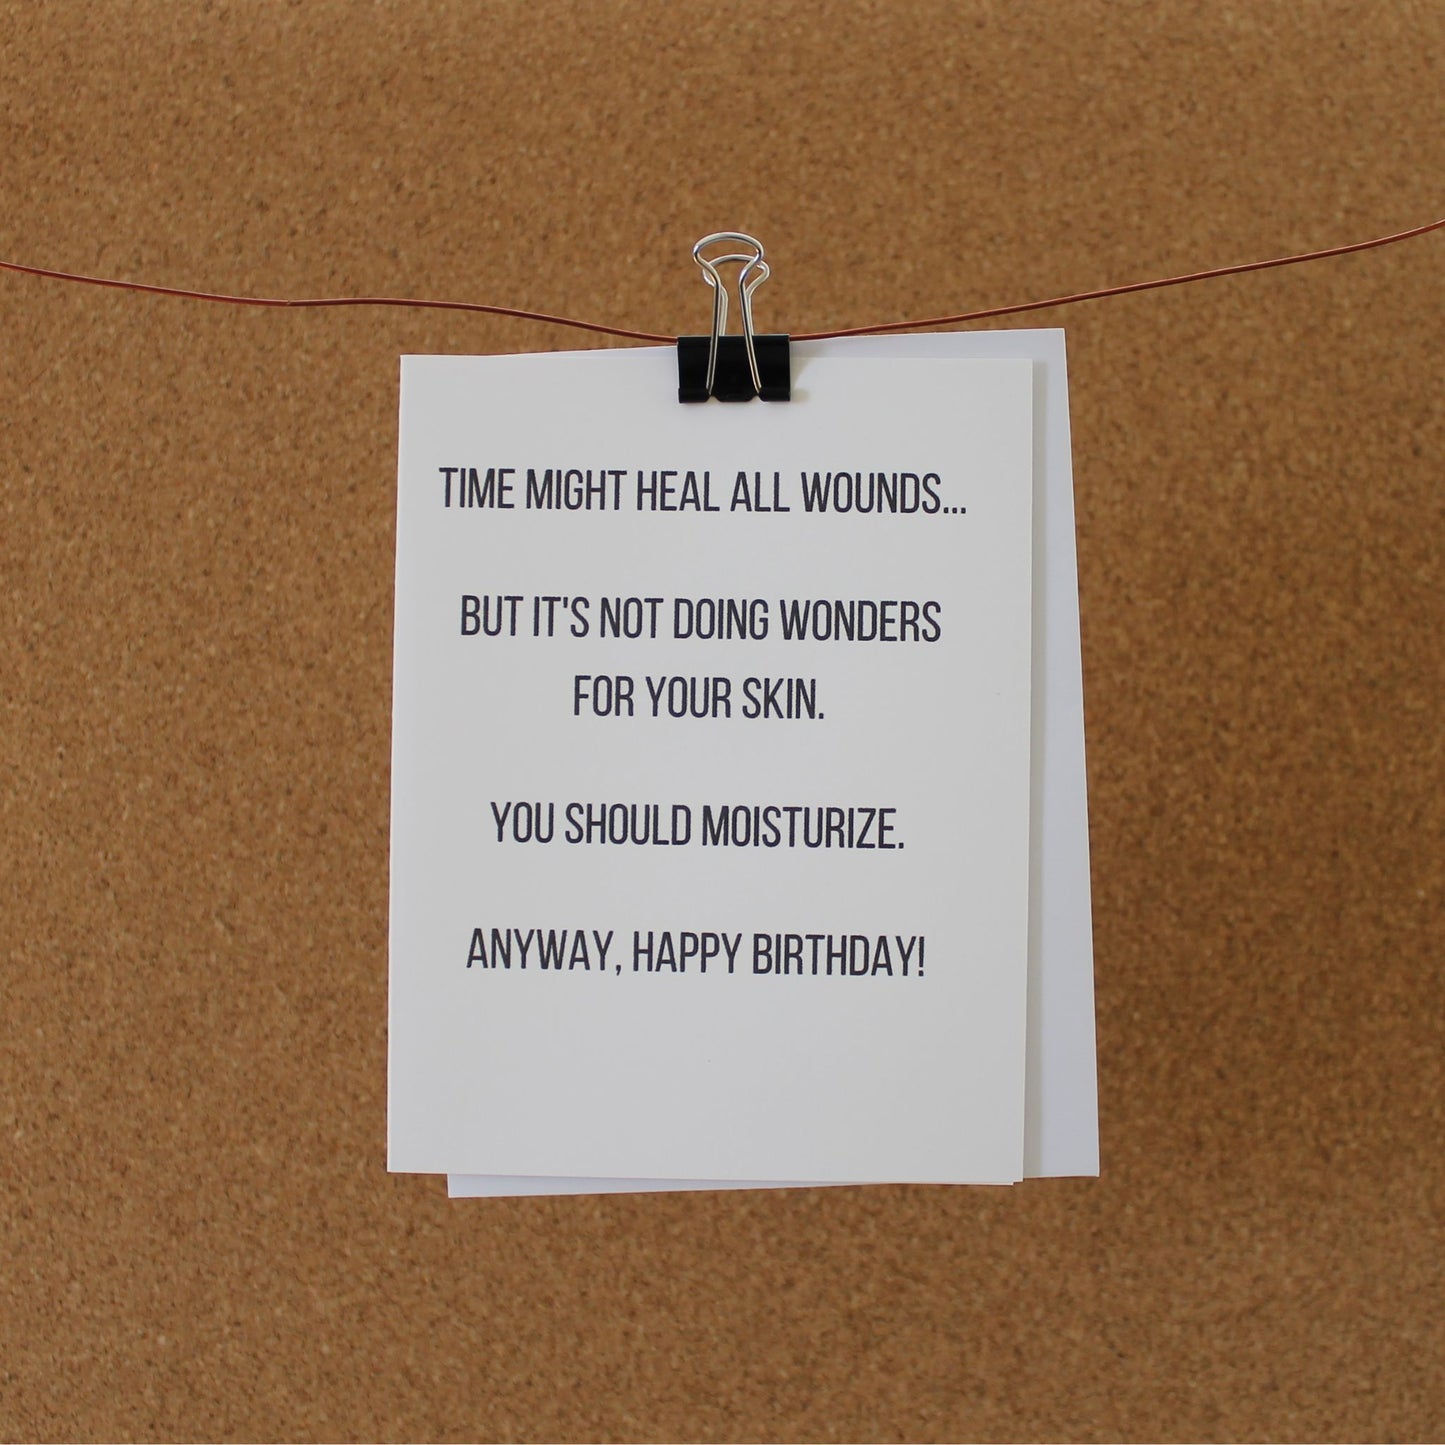 Funny Birthday Card: "Time heals everything. But it's not doing wonders for your skin. You should moisturize."